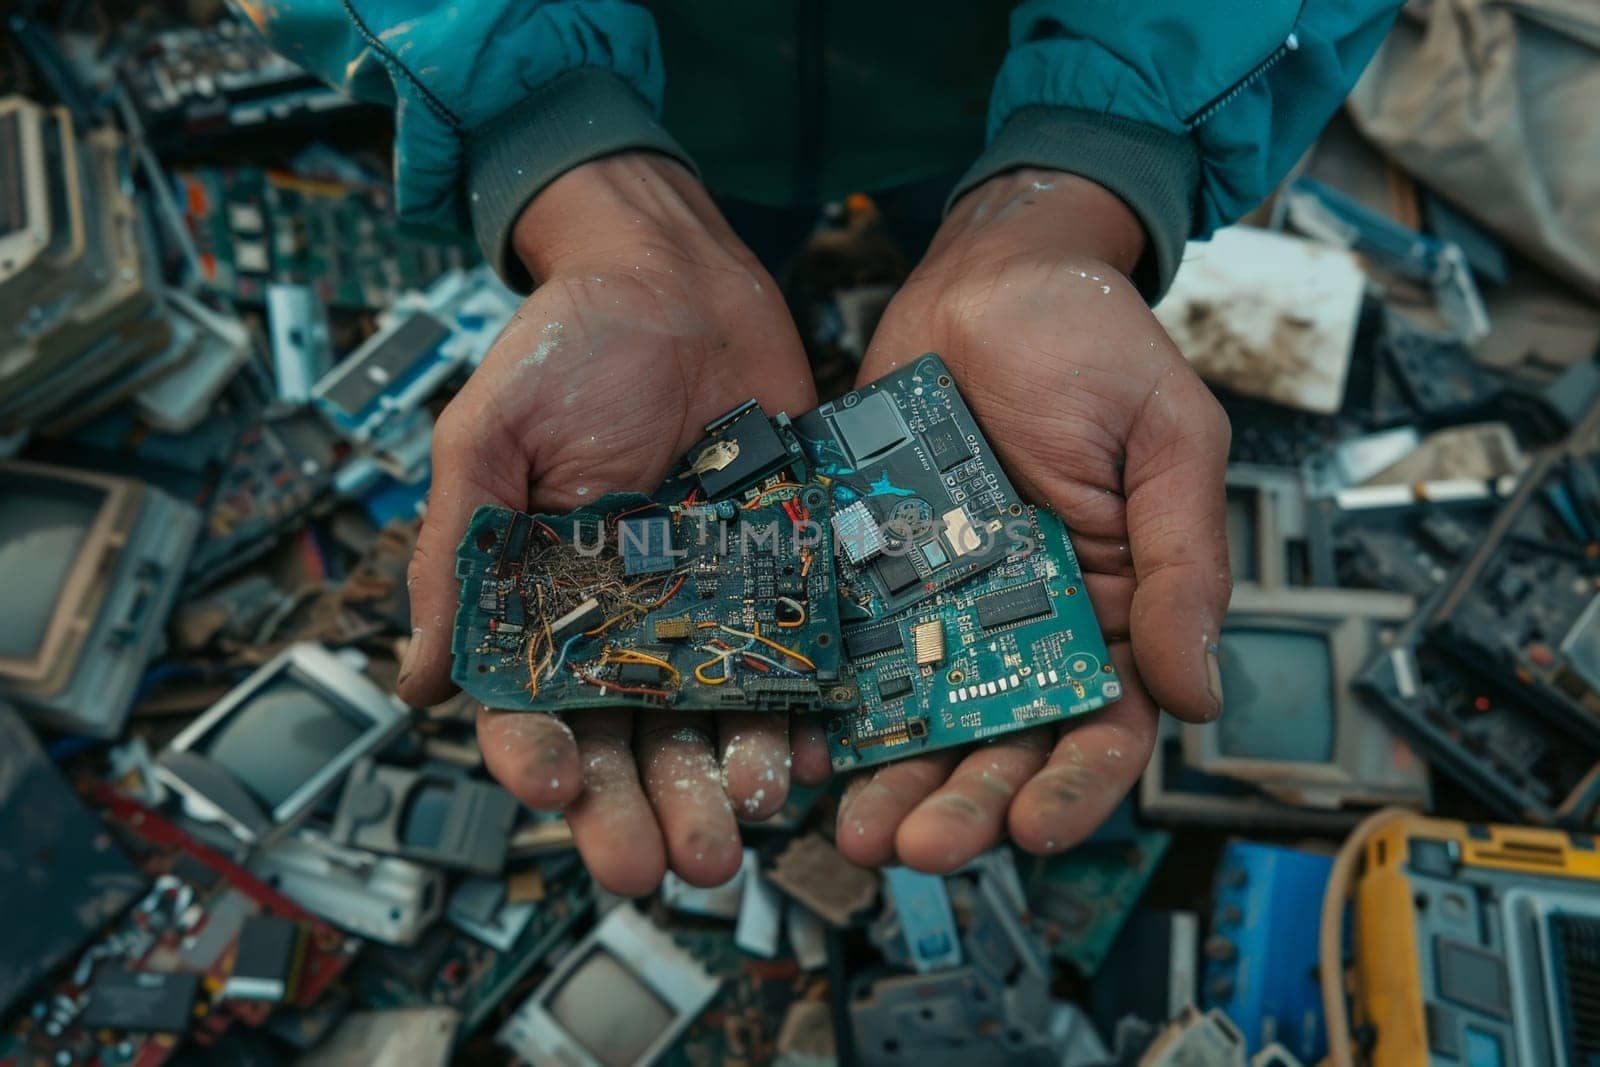 Electronic waste, Waste from electronic or industrial boards in hands.